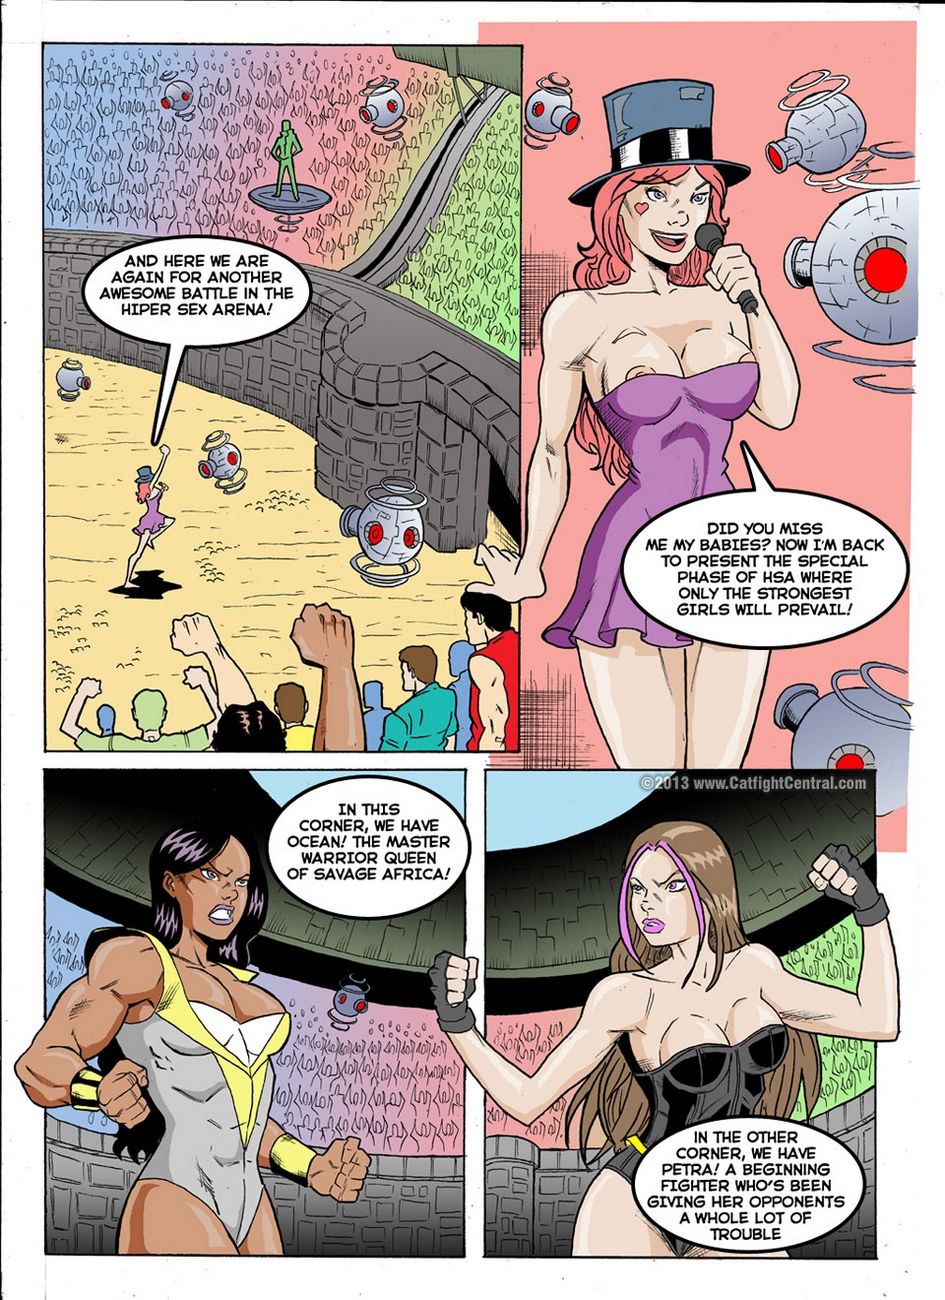 Hipersex Arena 17 page 2